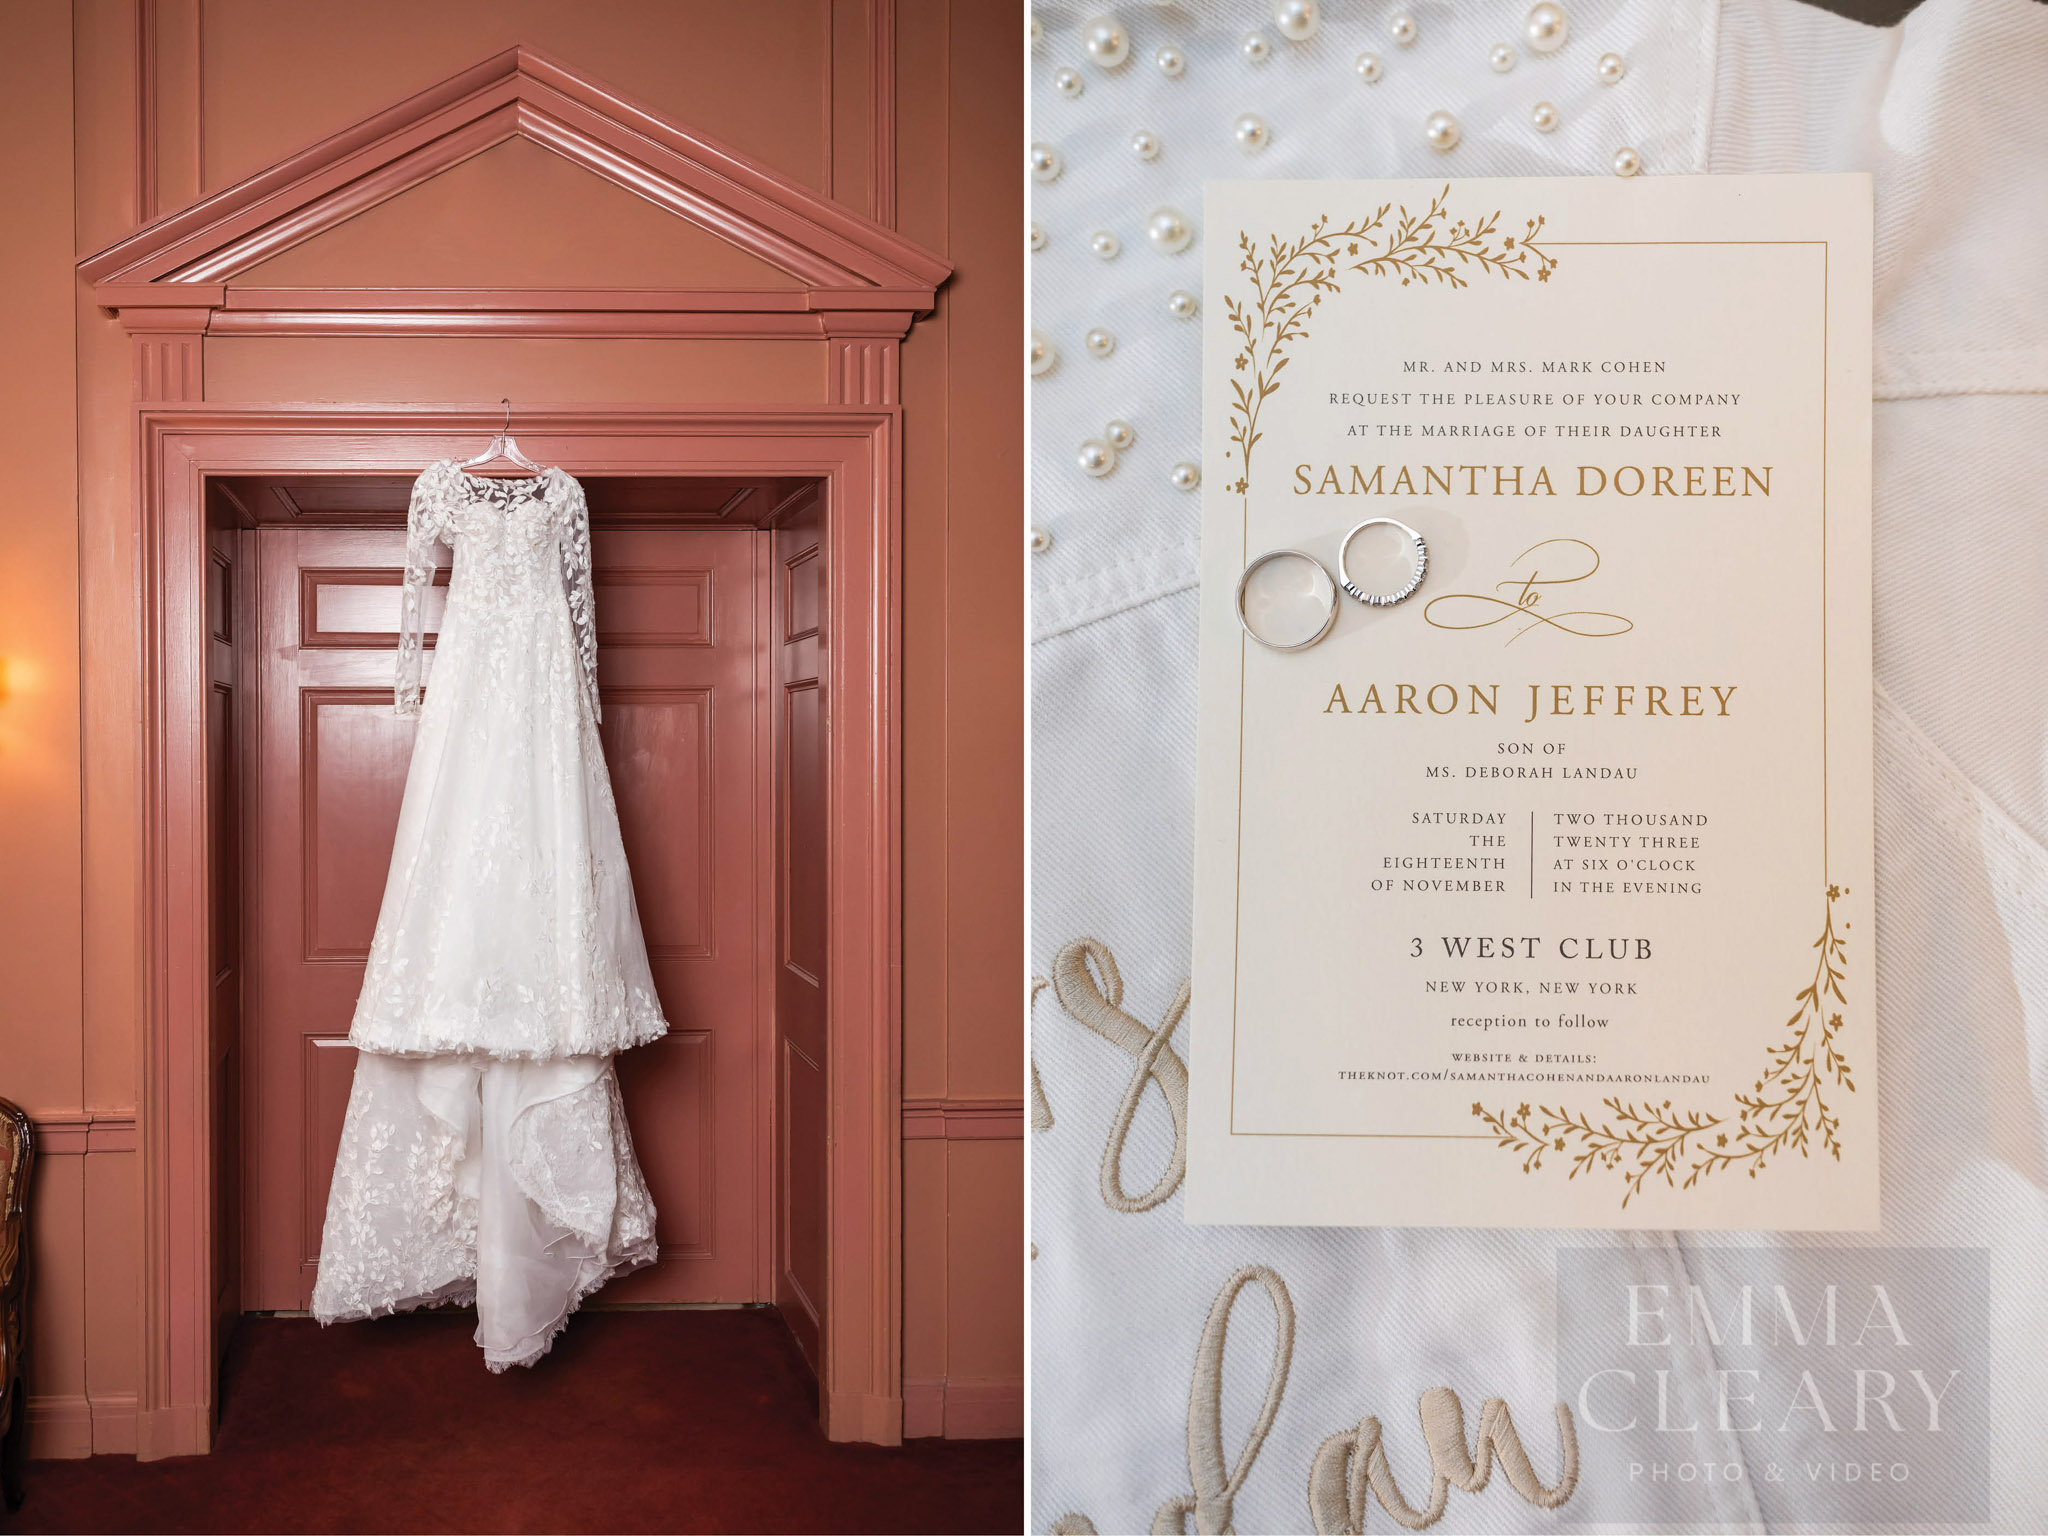 Wedding dress, invitations and rings